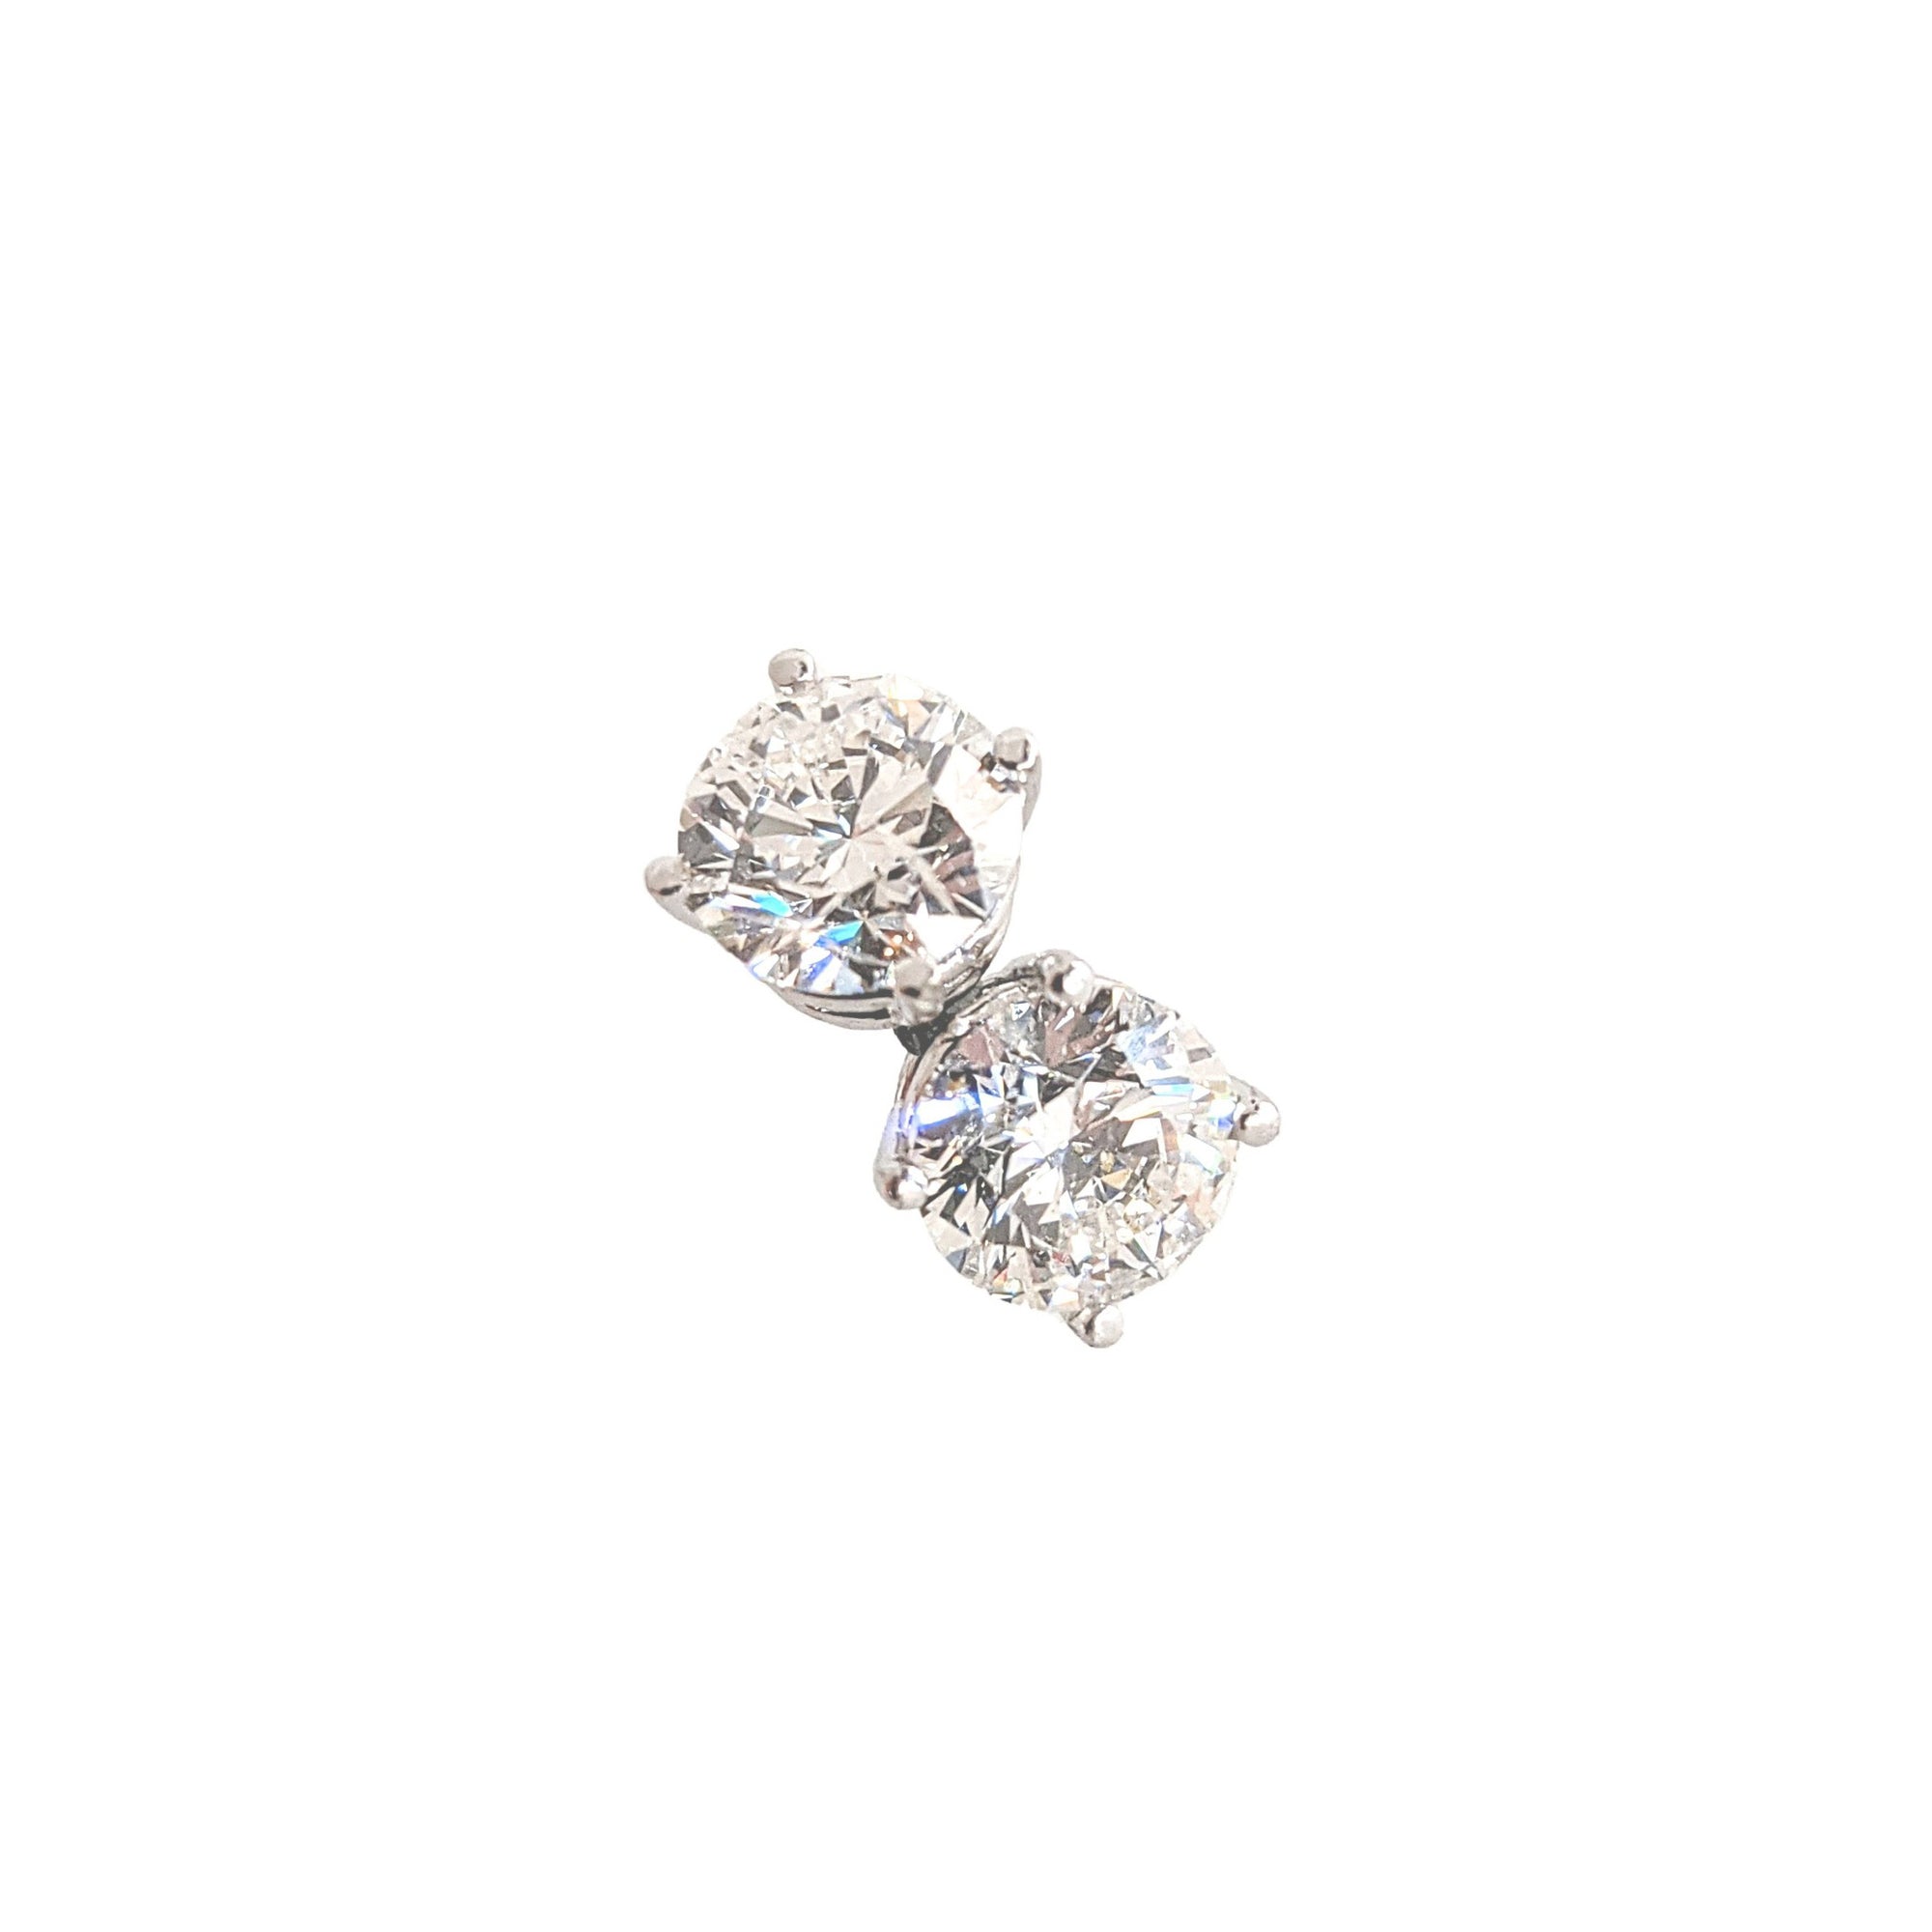 2.15ctw Lab Grown Diamond Stud Earrings with Friction Posts